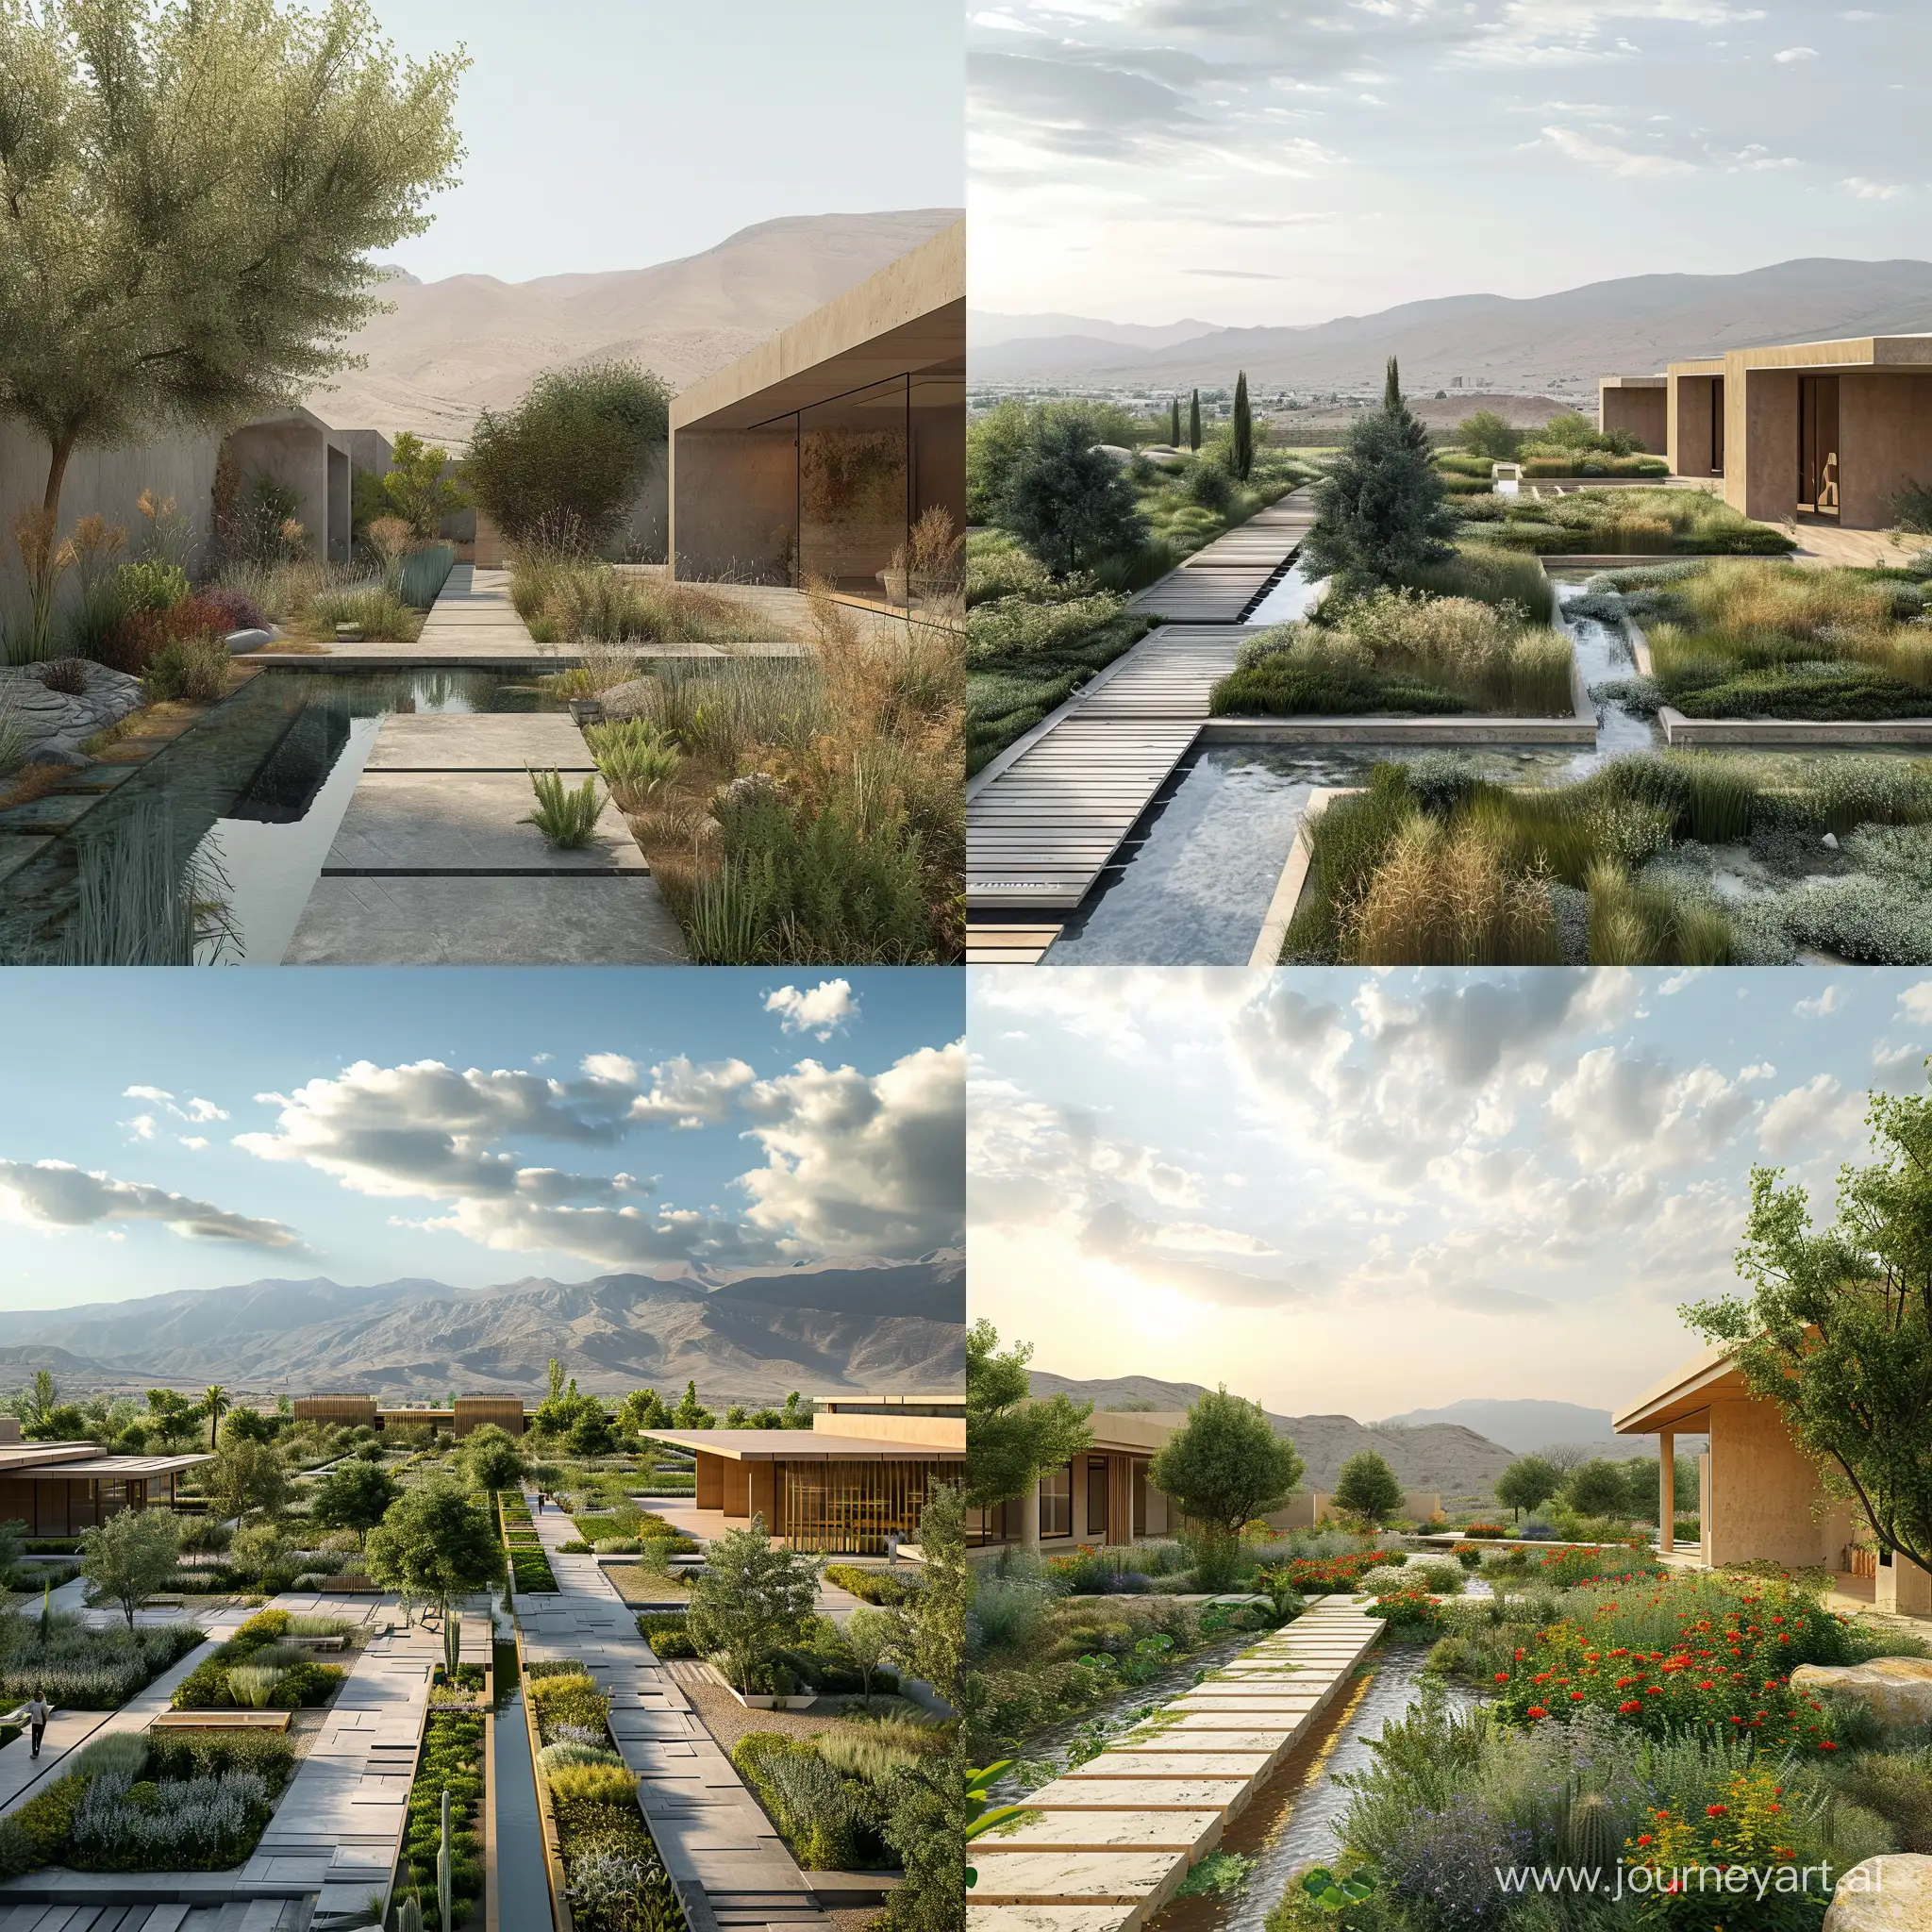 Sustainable-Iranian-Garden-and-Spa-Center-in-Hot-Dry-Climate